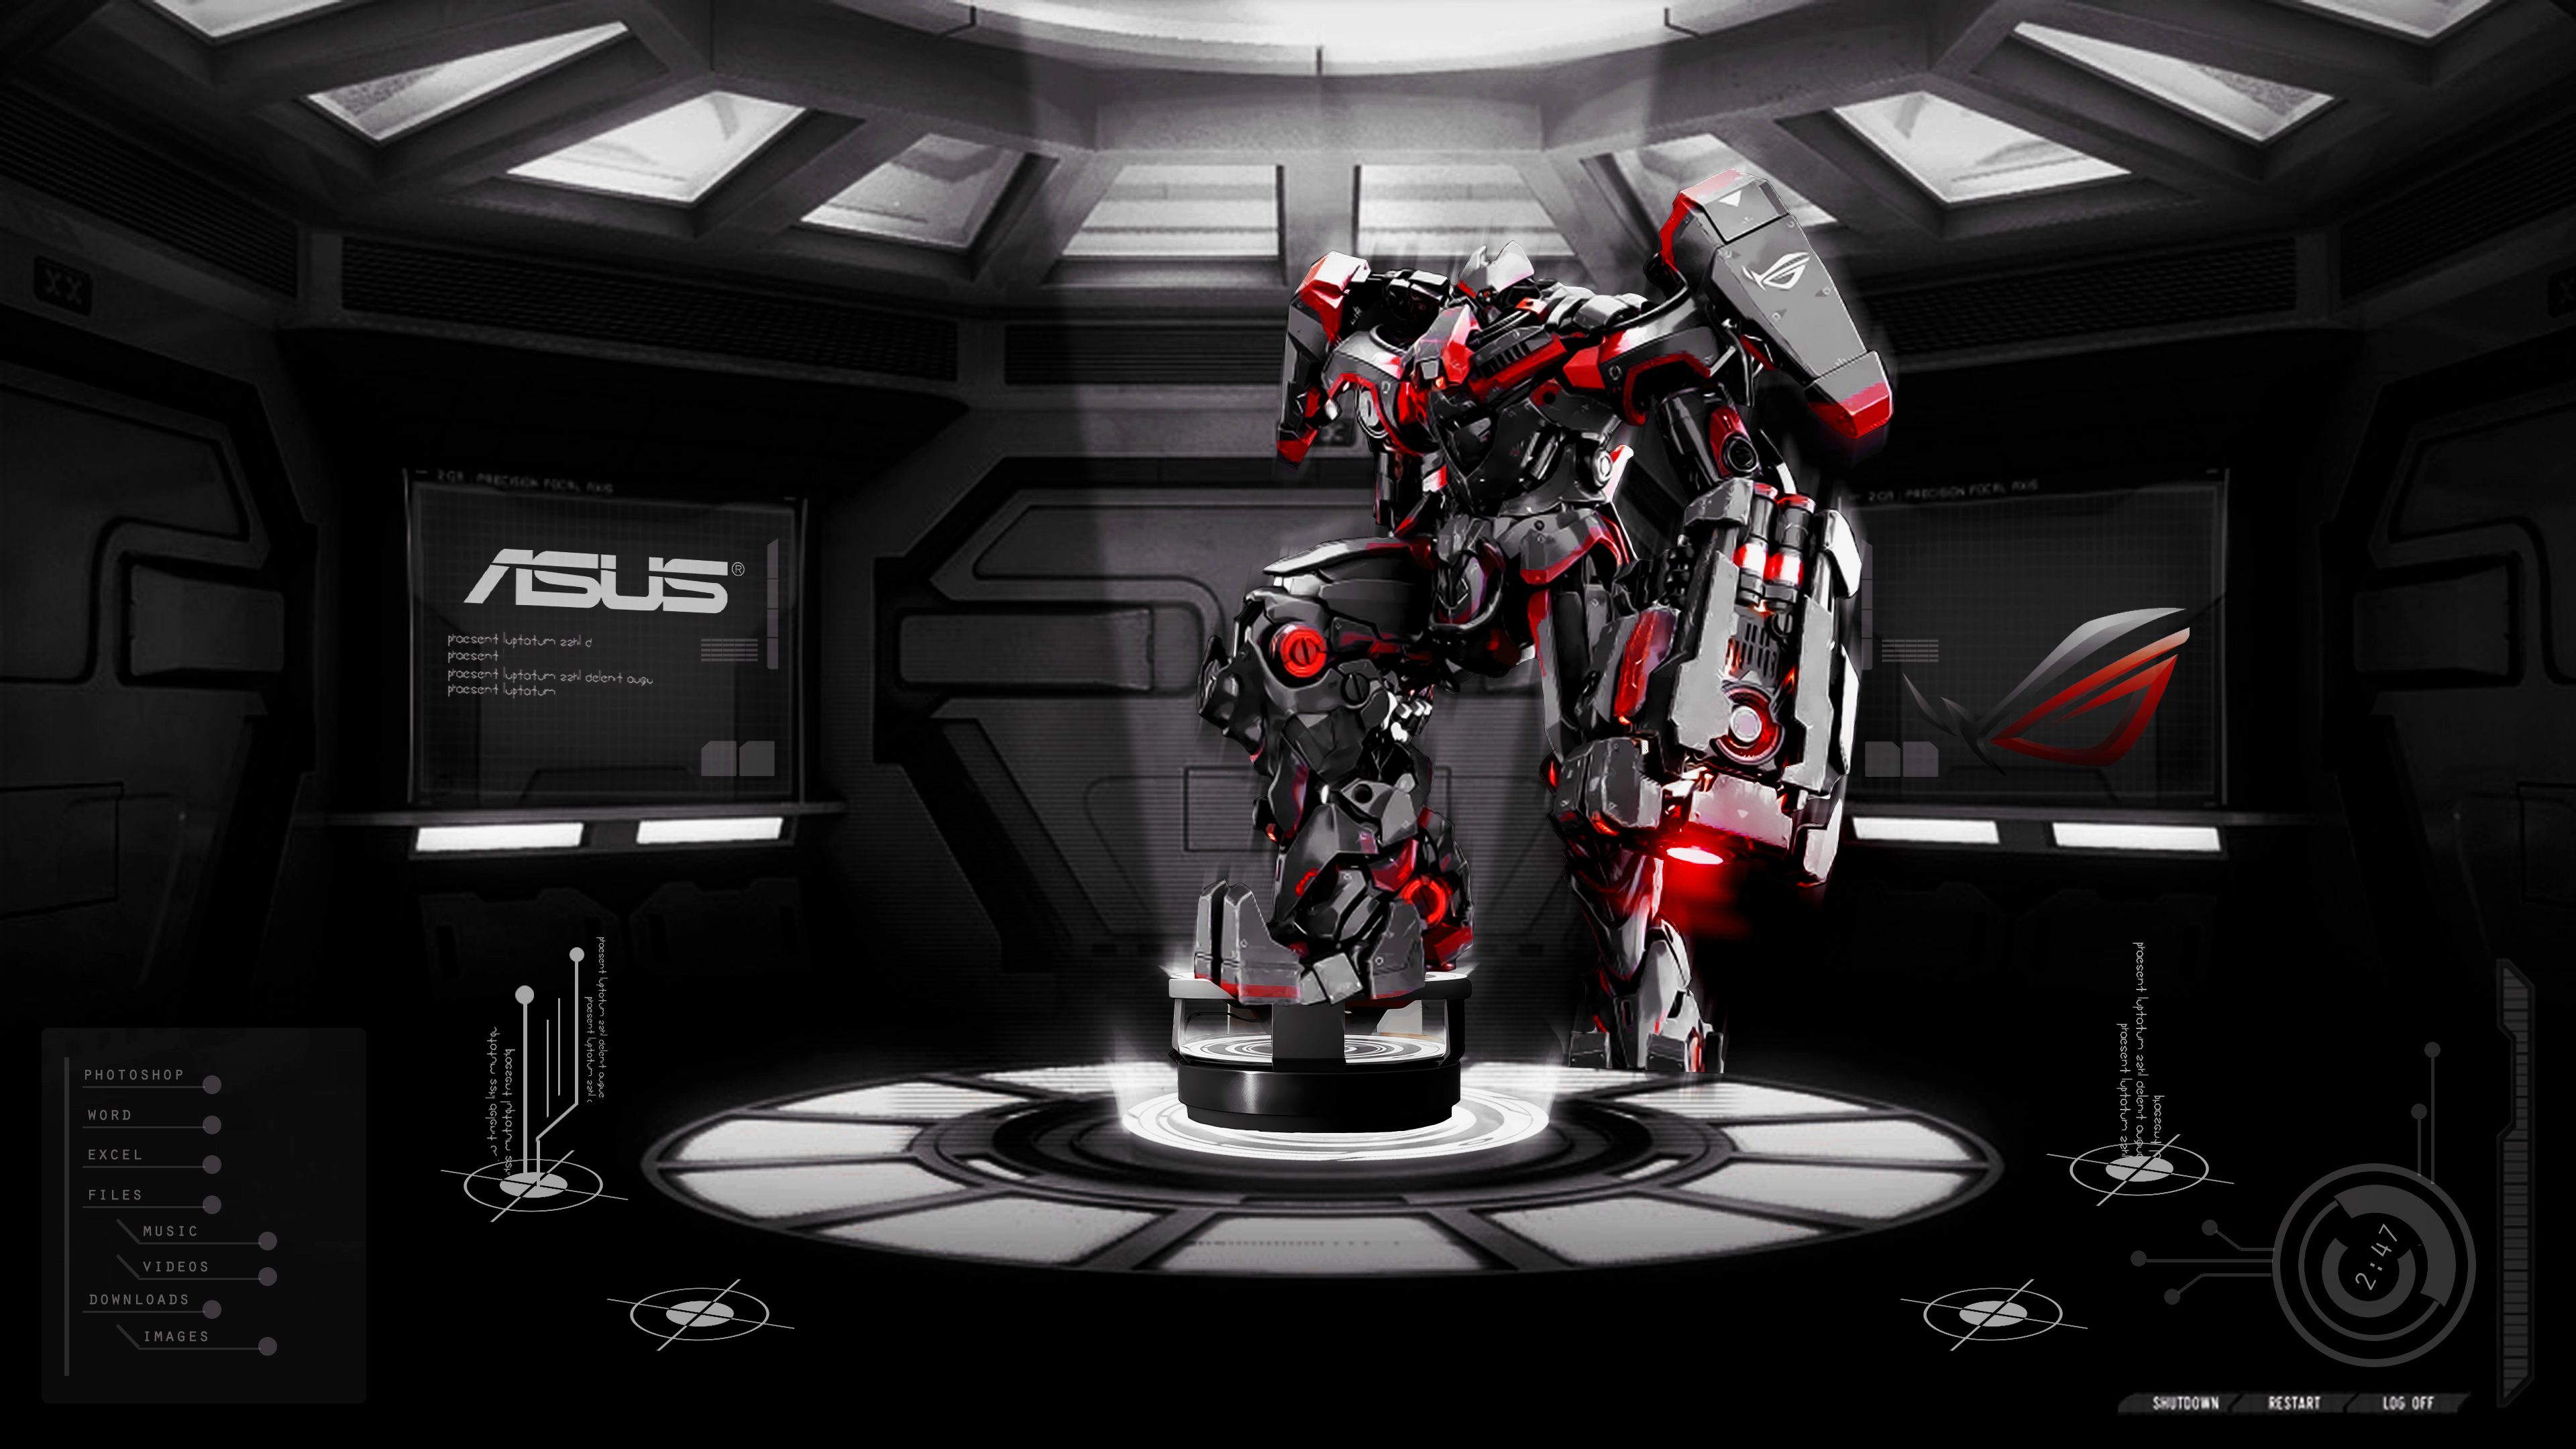 Win An ASUS PB287Q Monitor 2014 4K UHD Wallpaper Competition 3840x2160